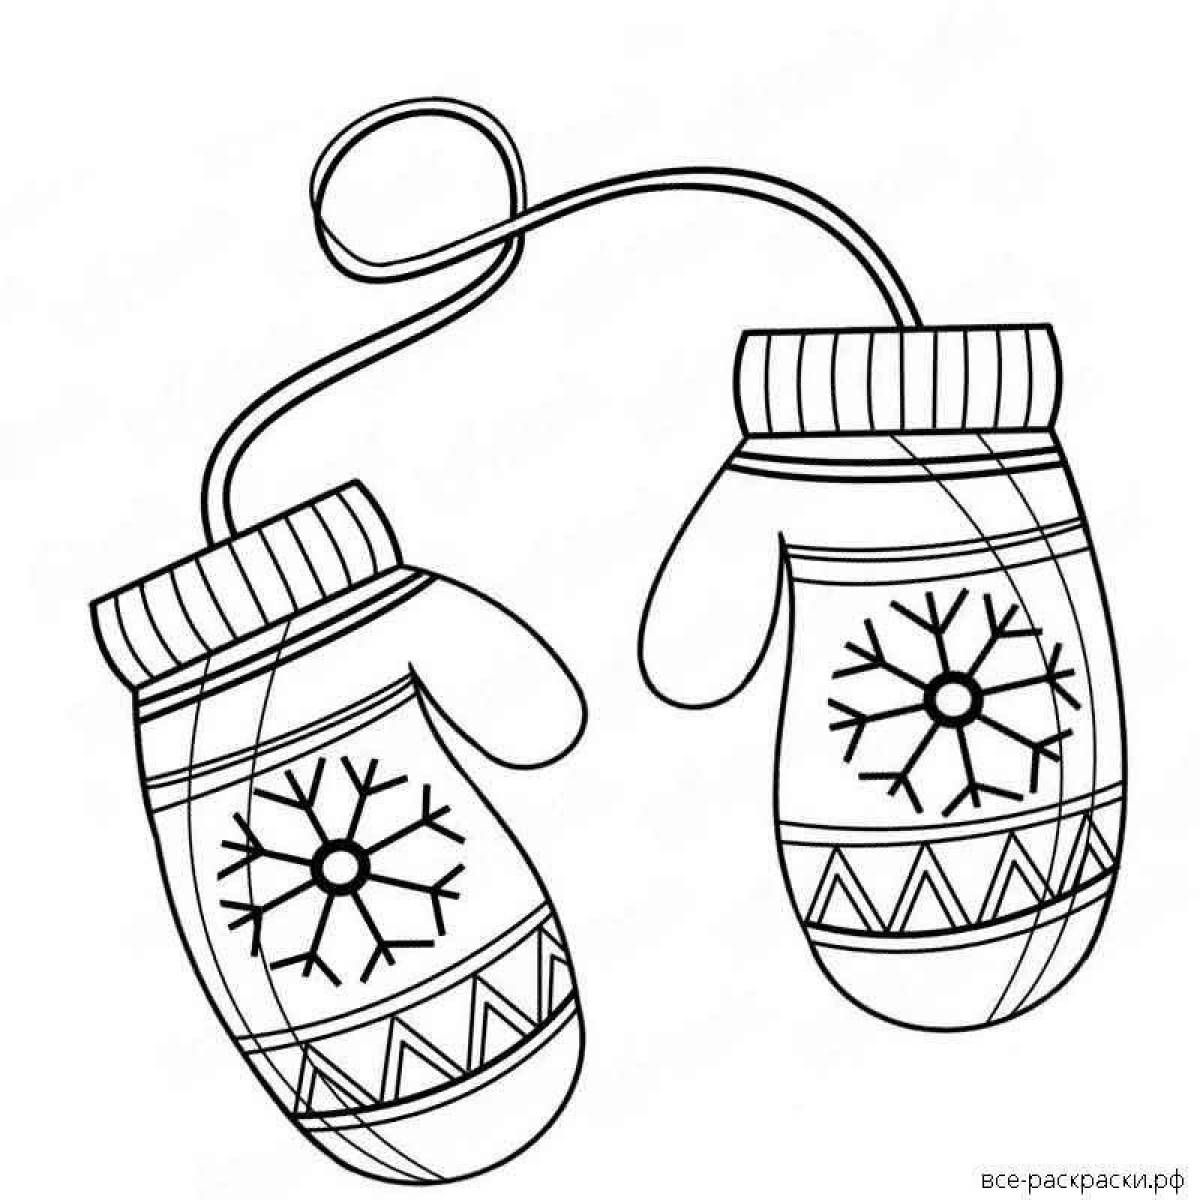 Cute mittens coloring page for 3-4 year olds